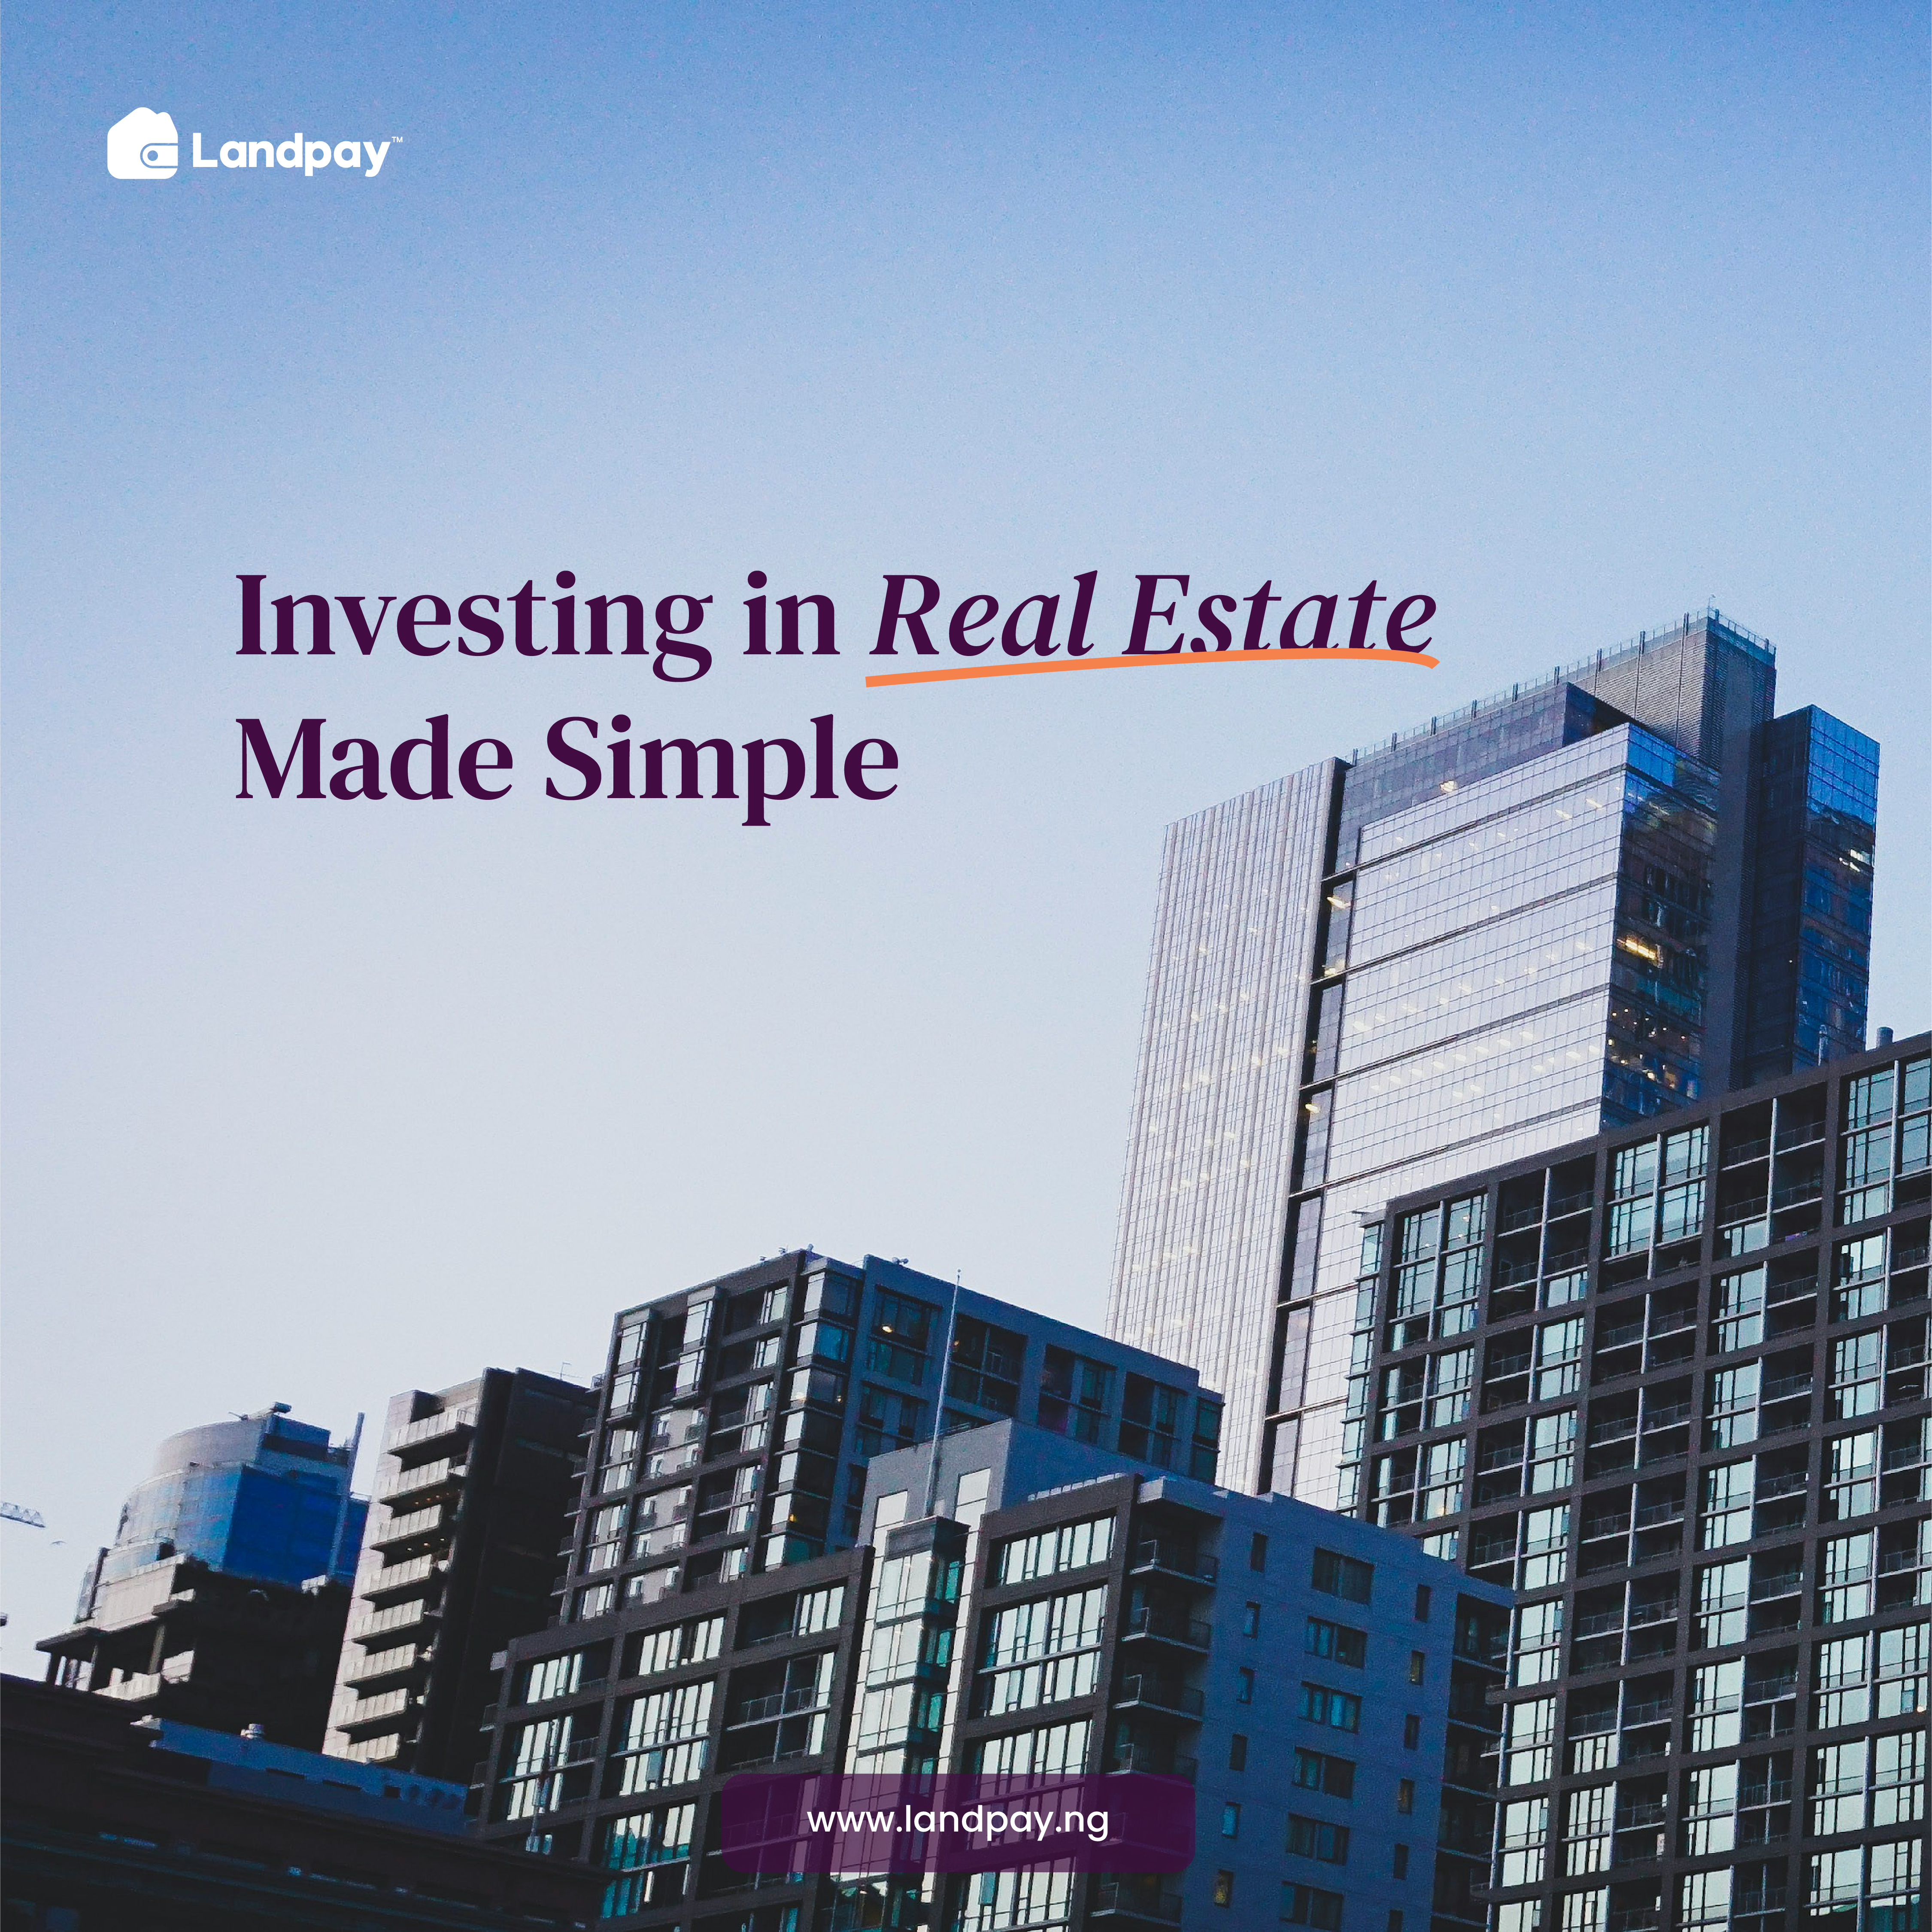 INVESTING IN REAL ESTATE MADE SIMPLE